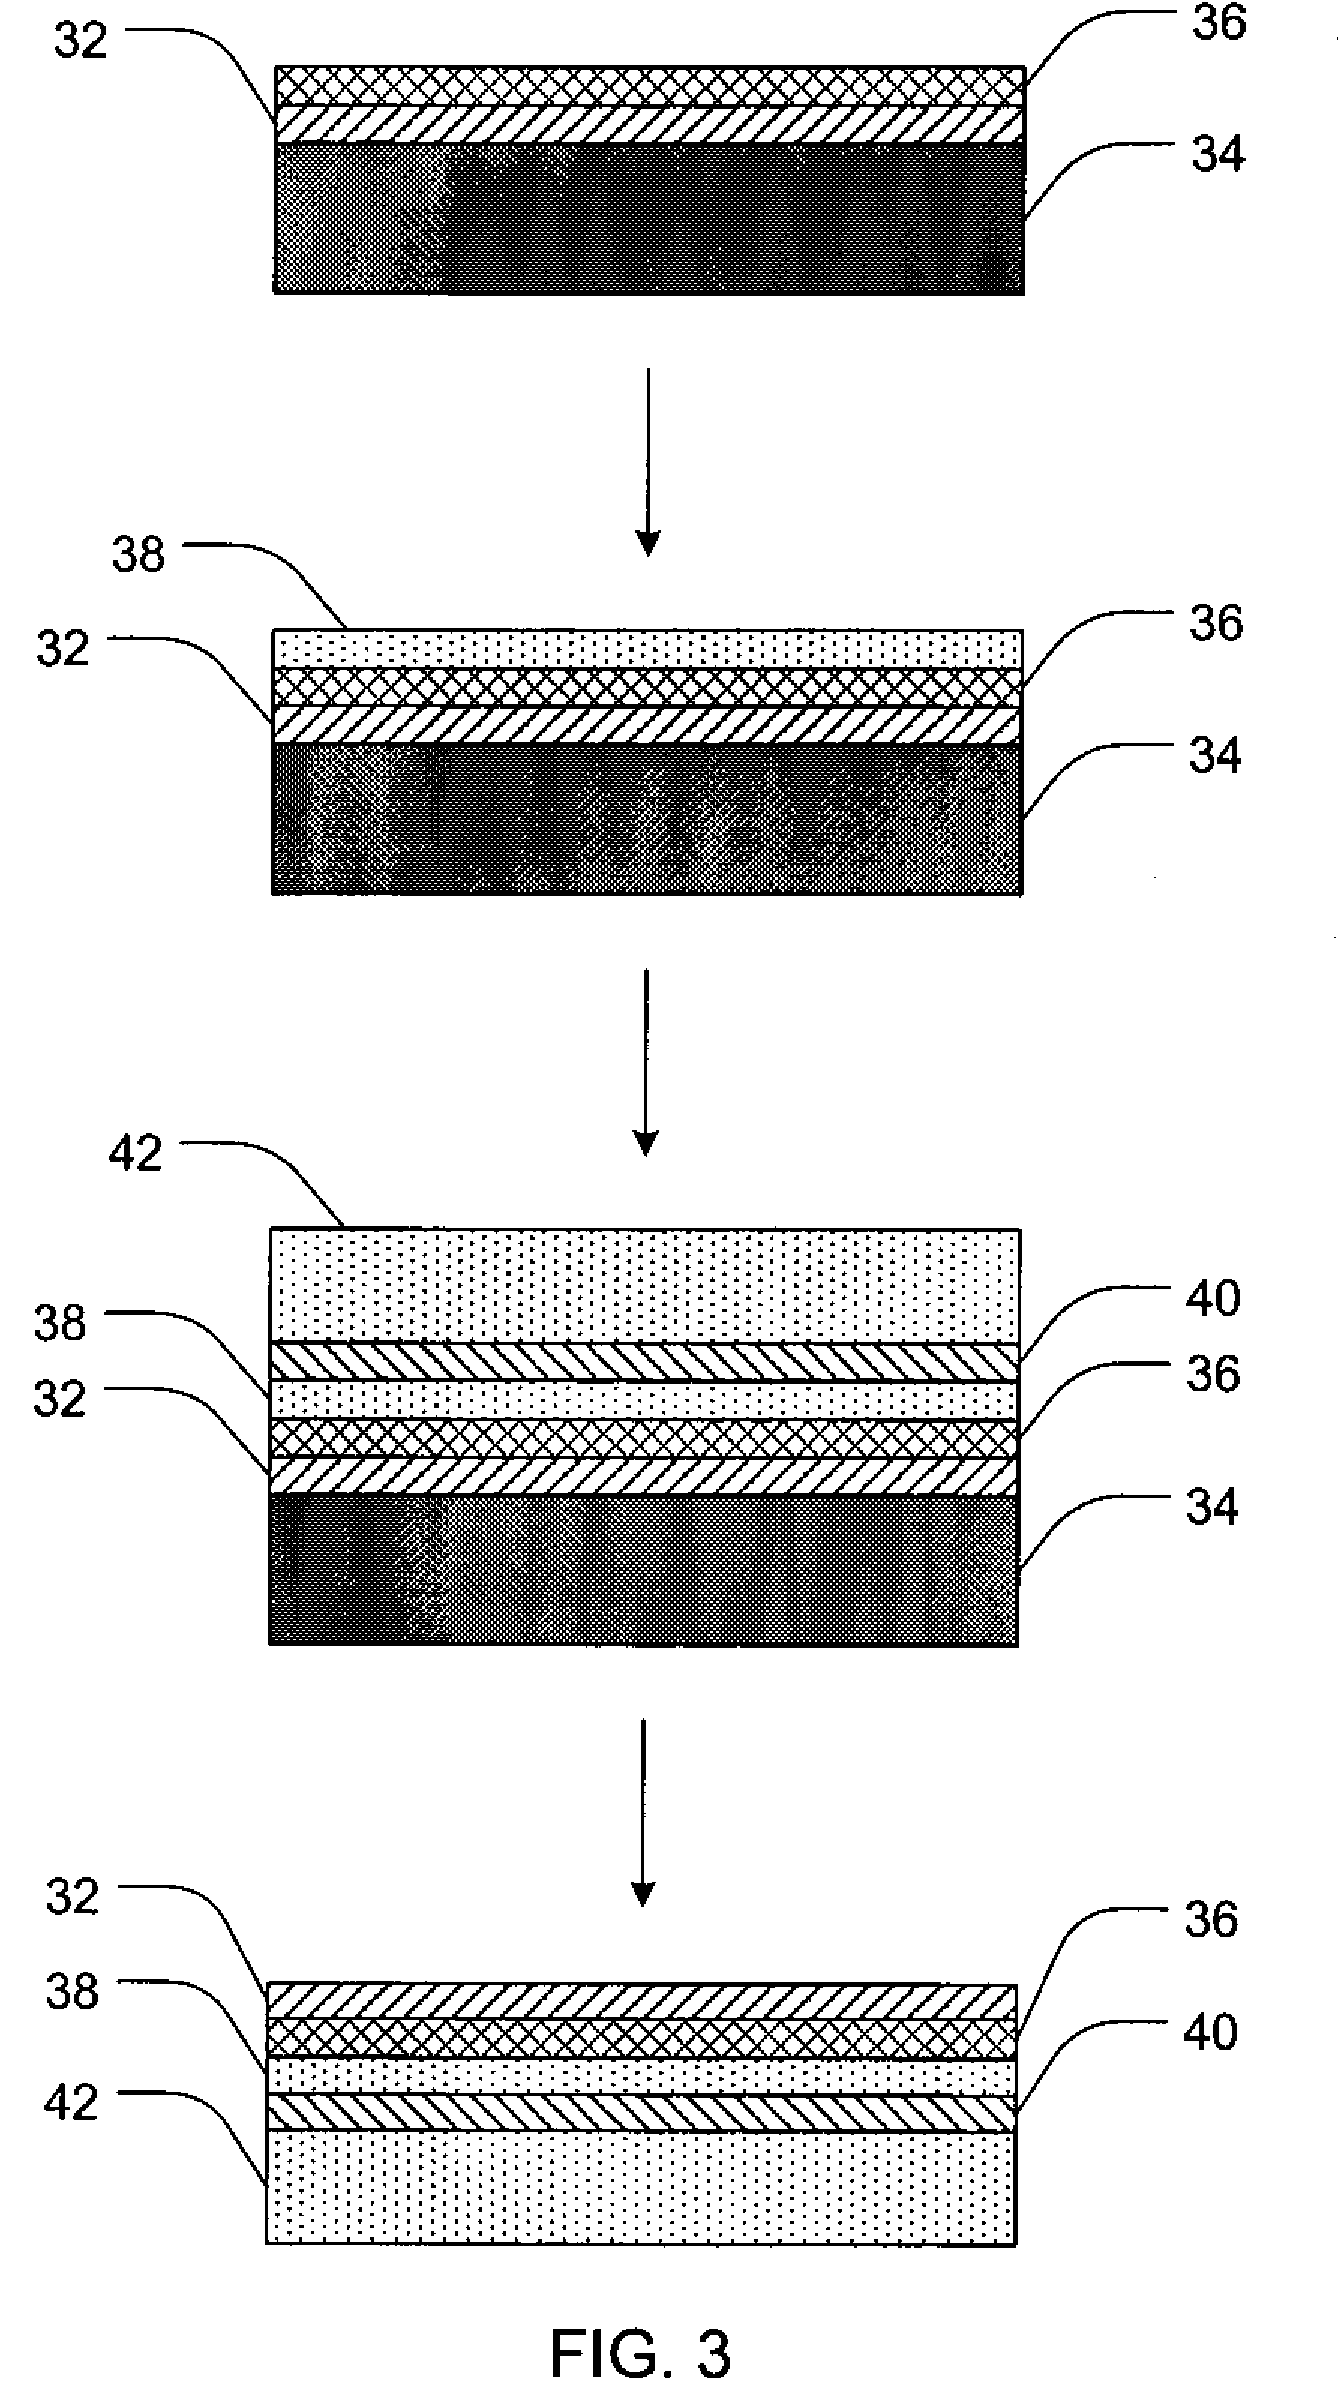 Doped Diamond LED Devices and Associated Methods